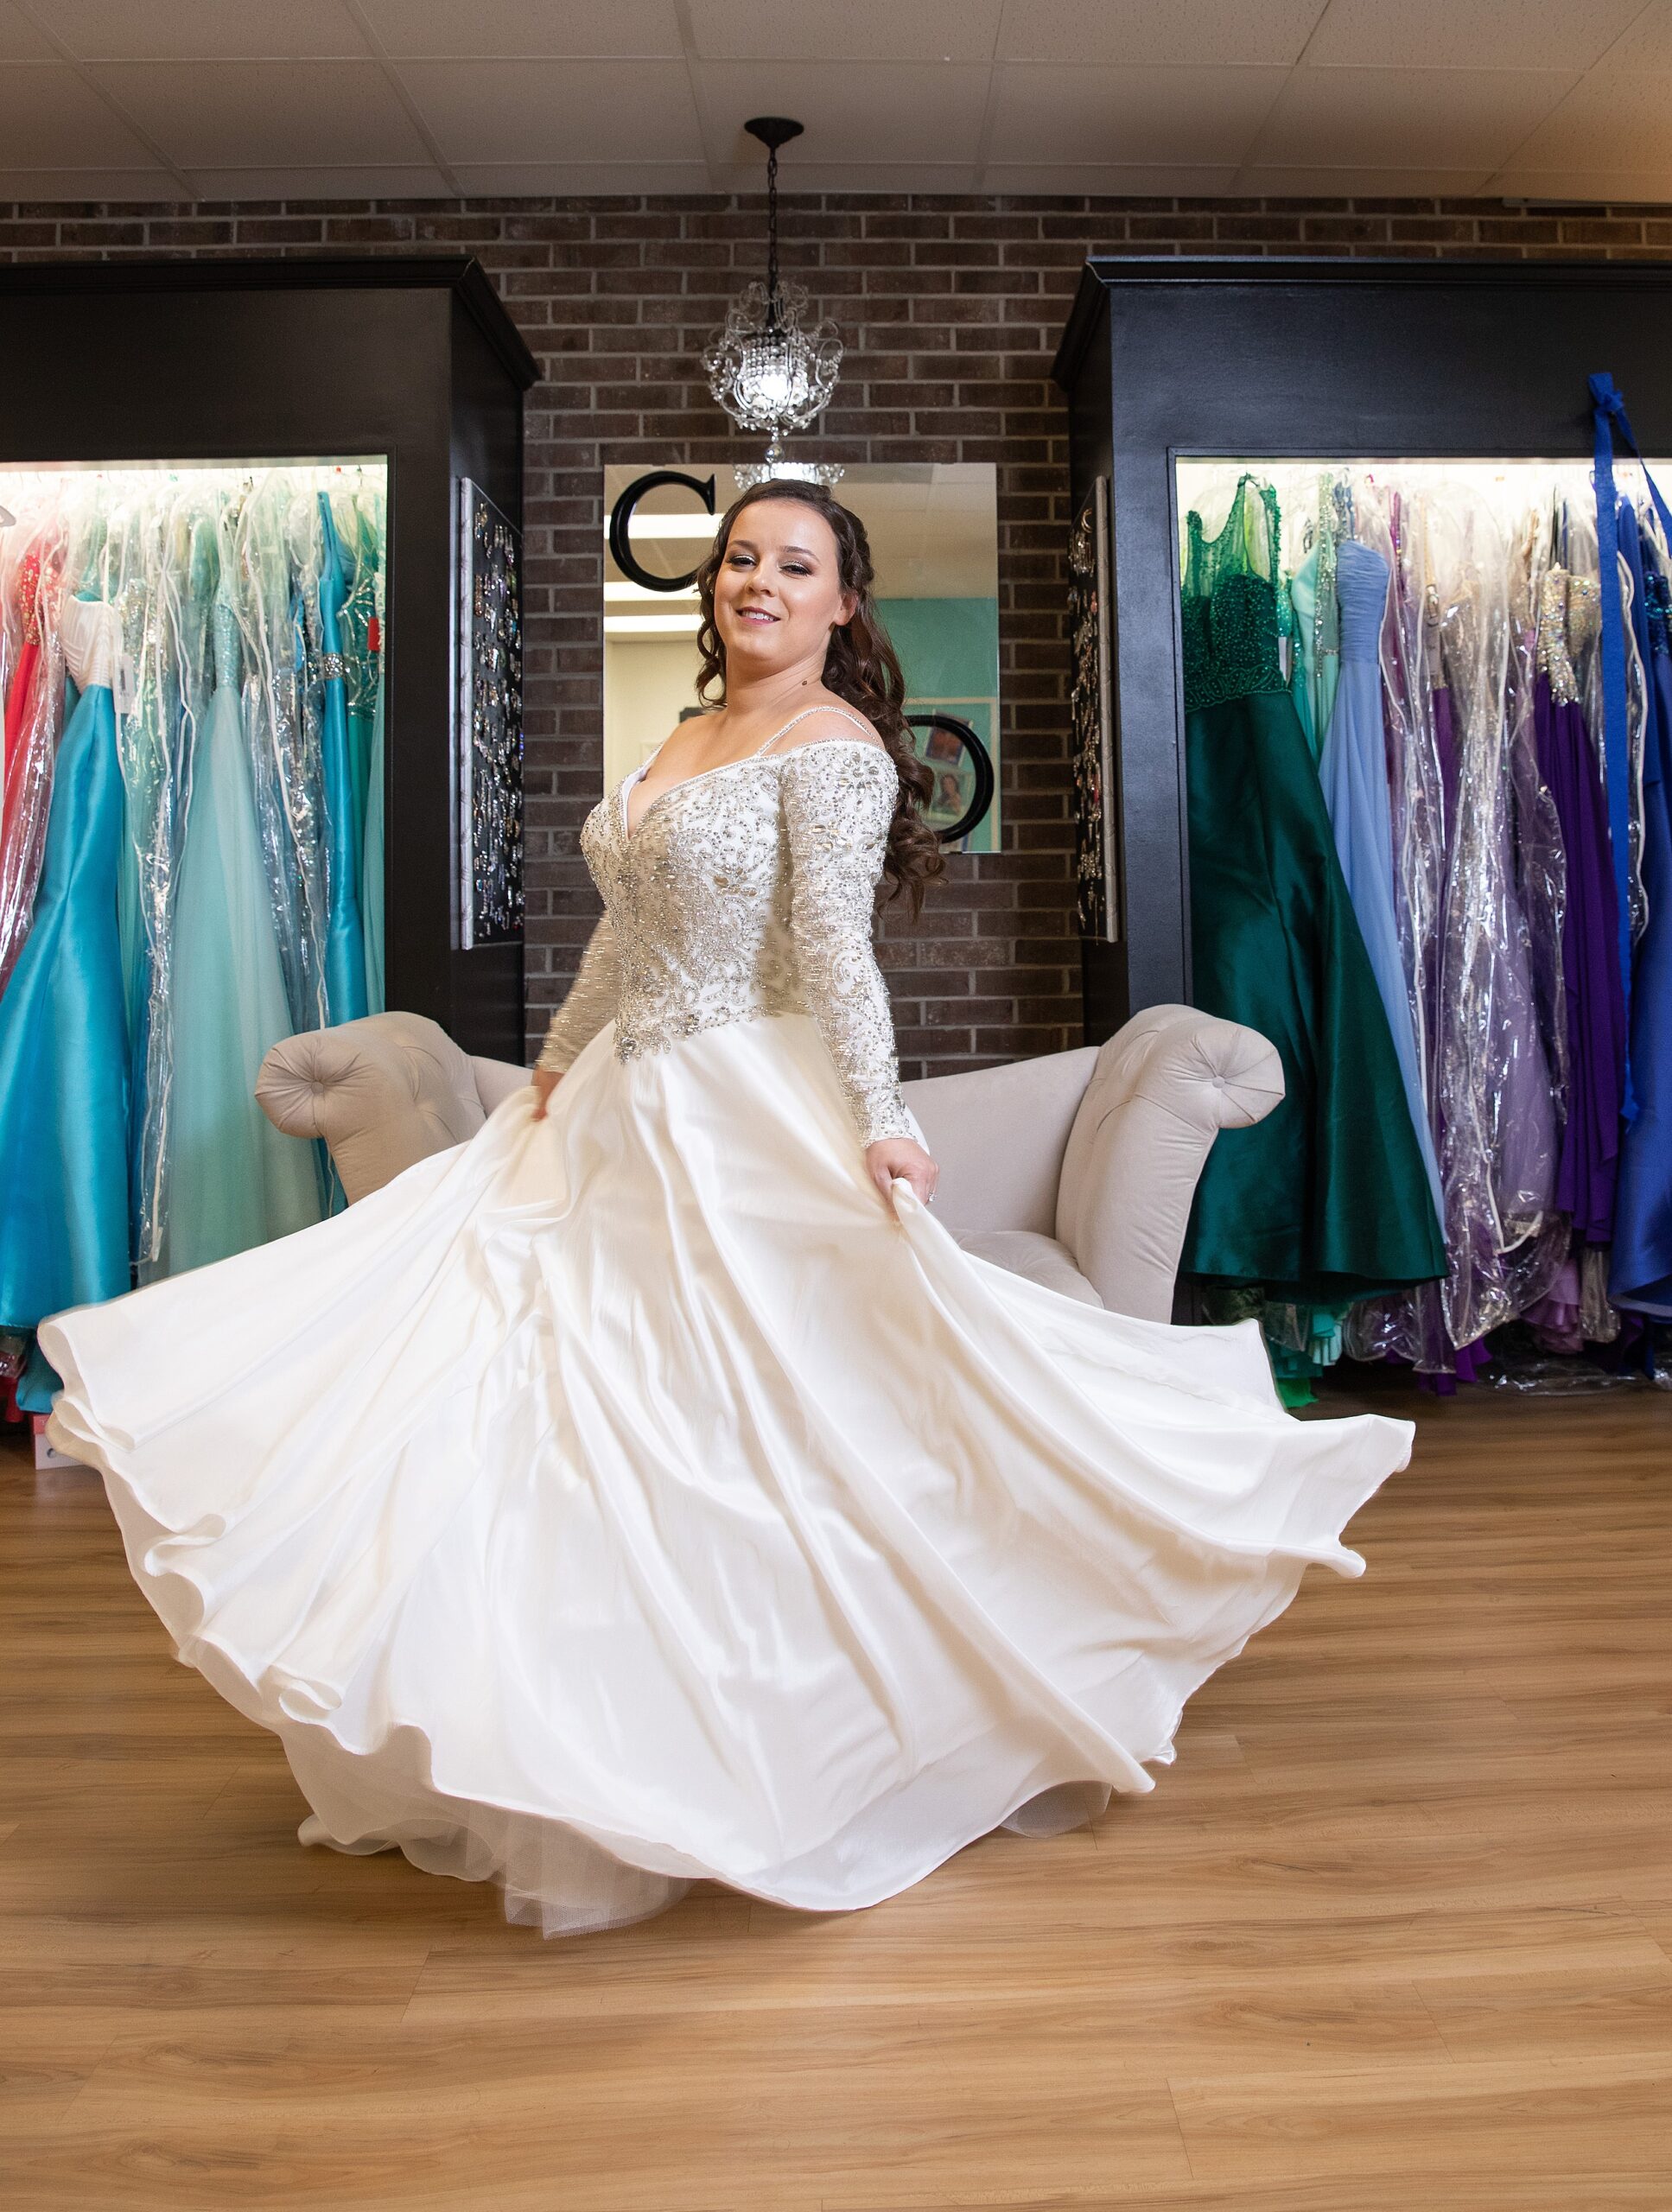 A bride twirls in her dress in the getting ready room at her deercreek country club wedding